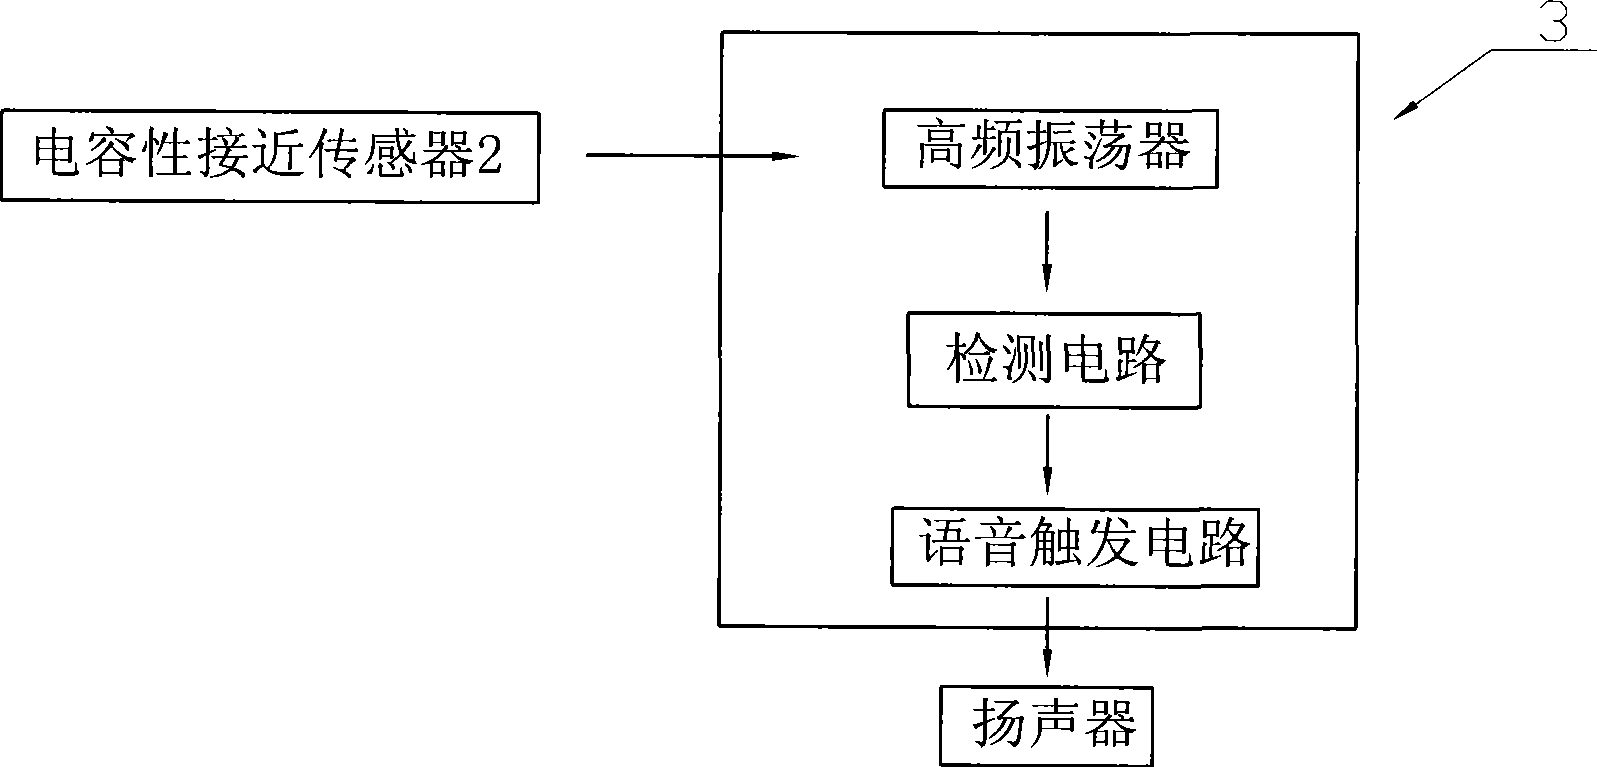 Detection prompting method and system for washing machine